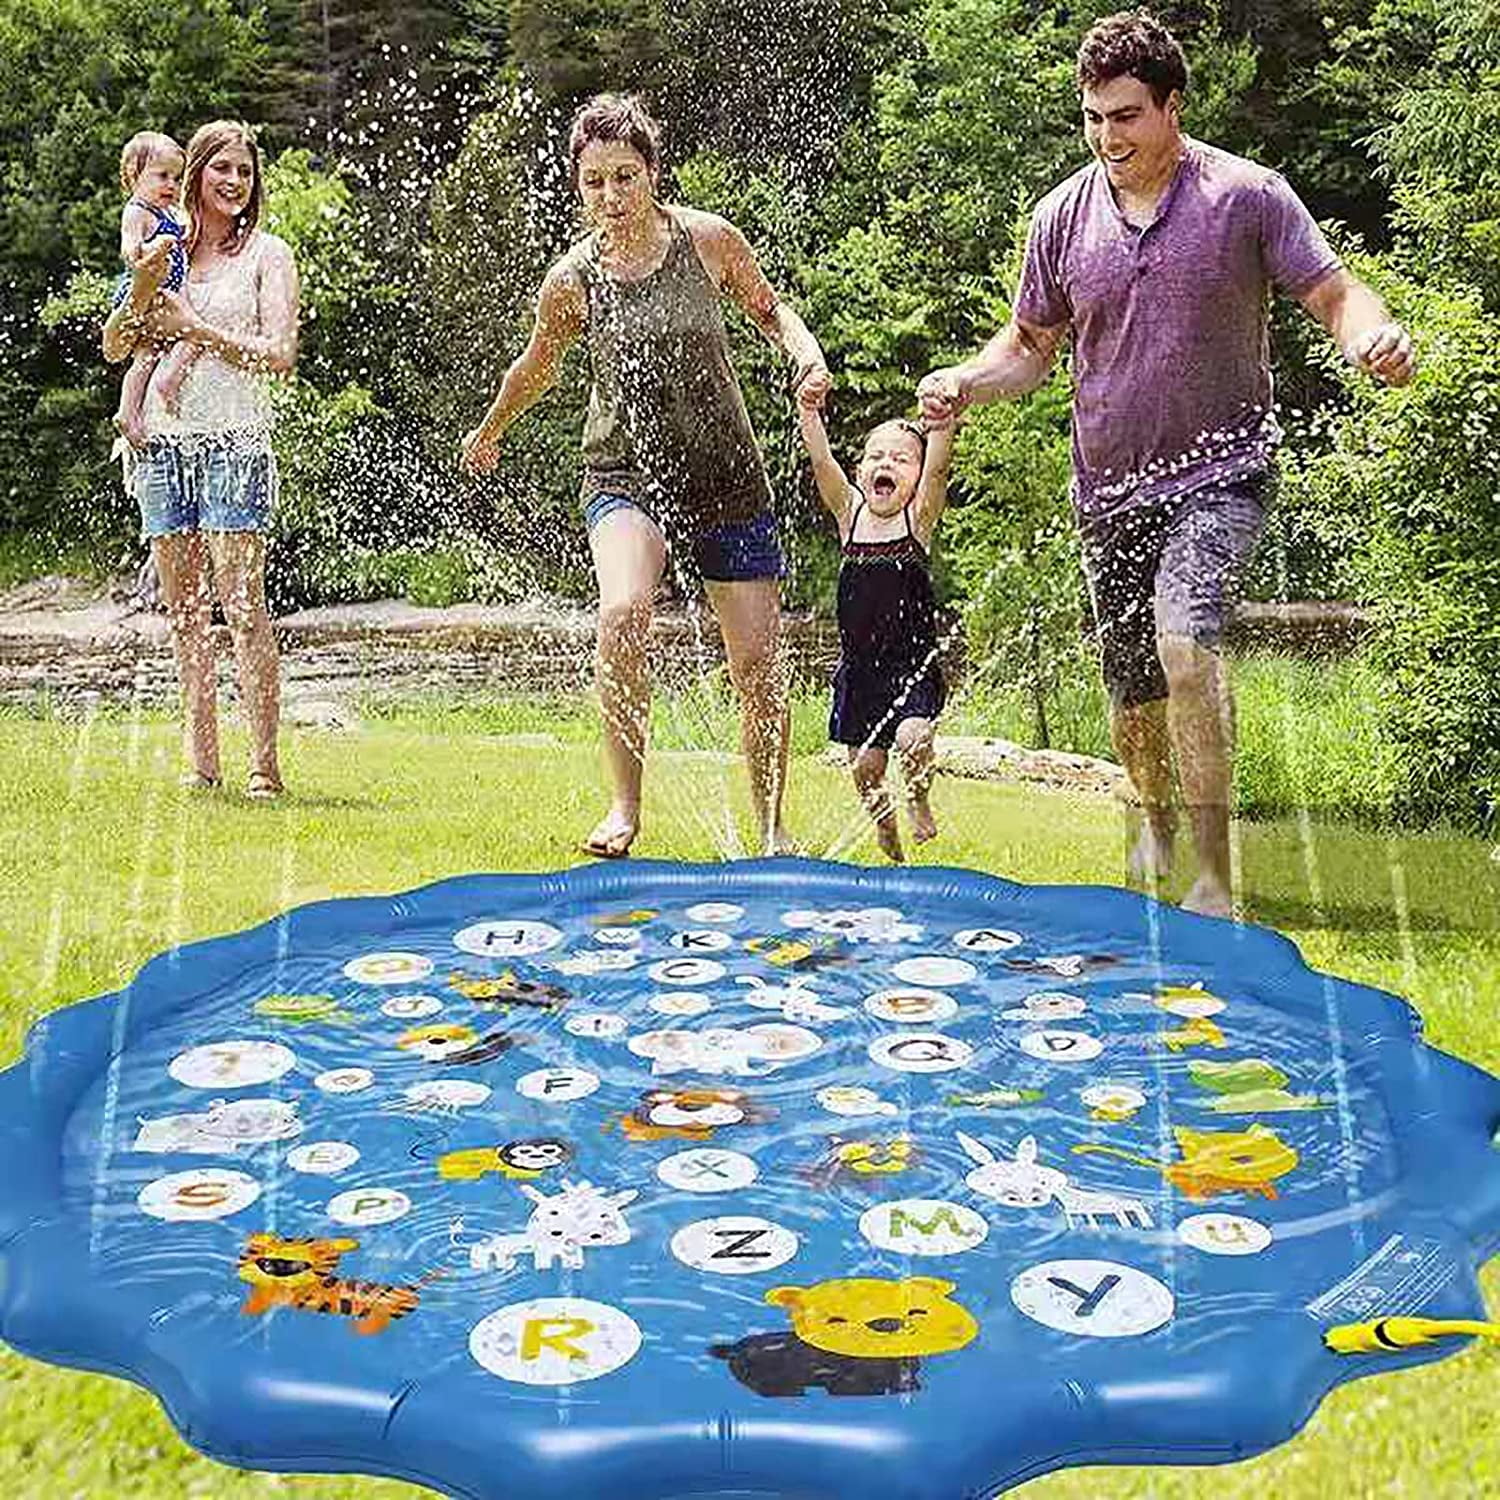 Details about   Water Sprinkler Splash Pad for Kids-Upgraded 68' Outside Water Play Game Fountai 